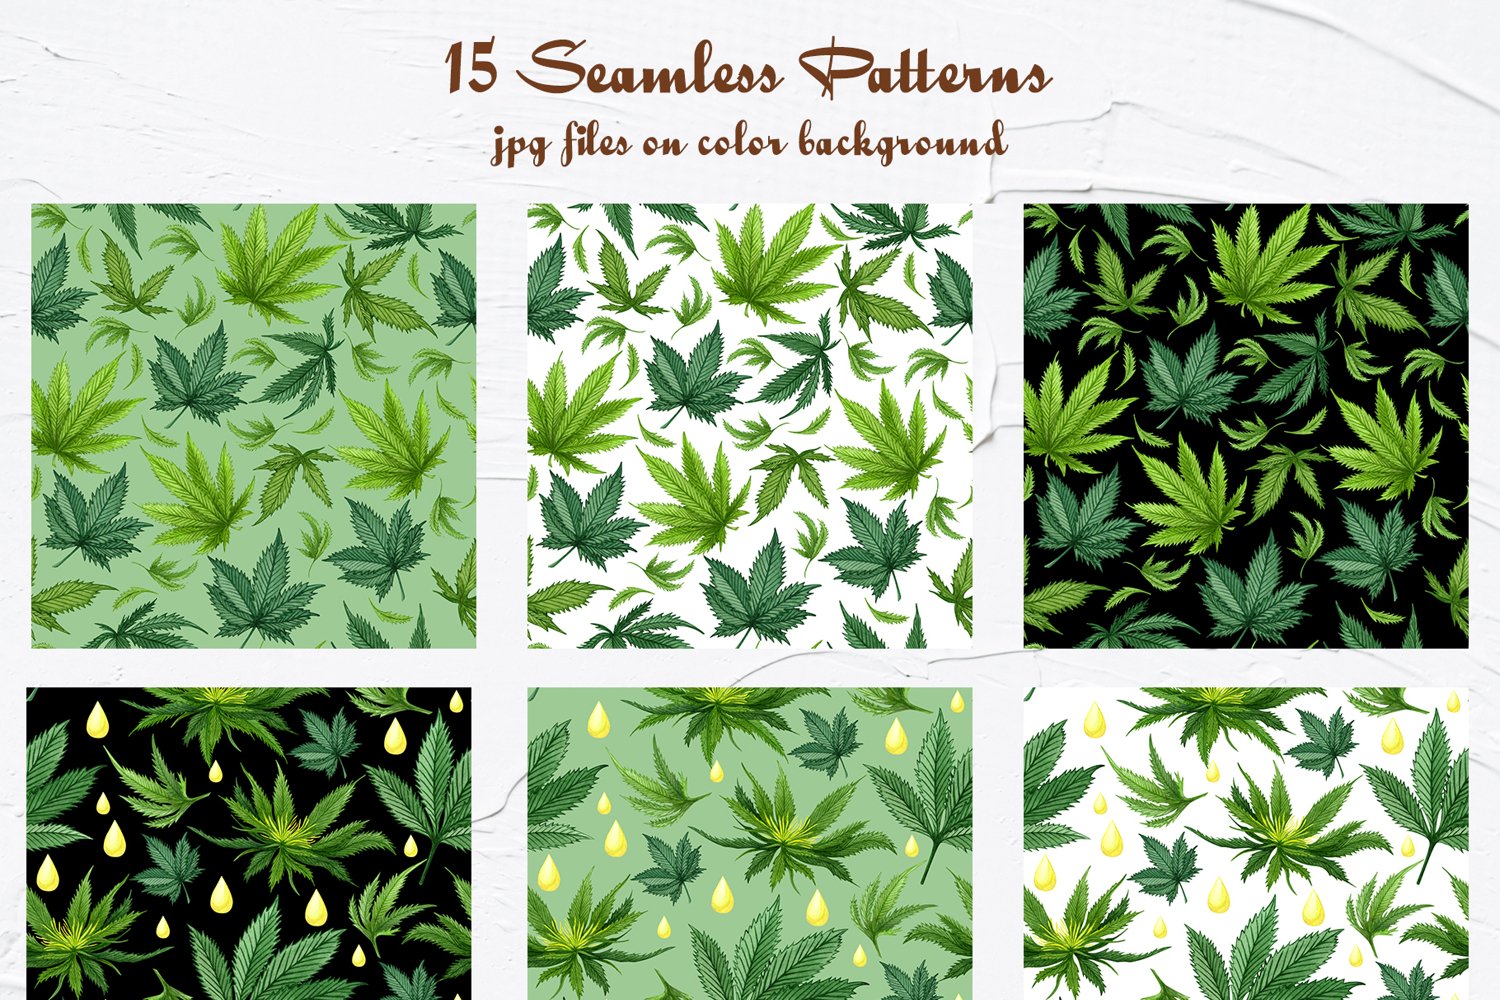 There are 15 seamless patterns on colorful background.